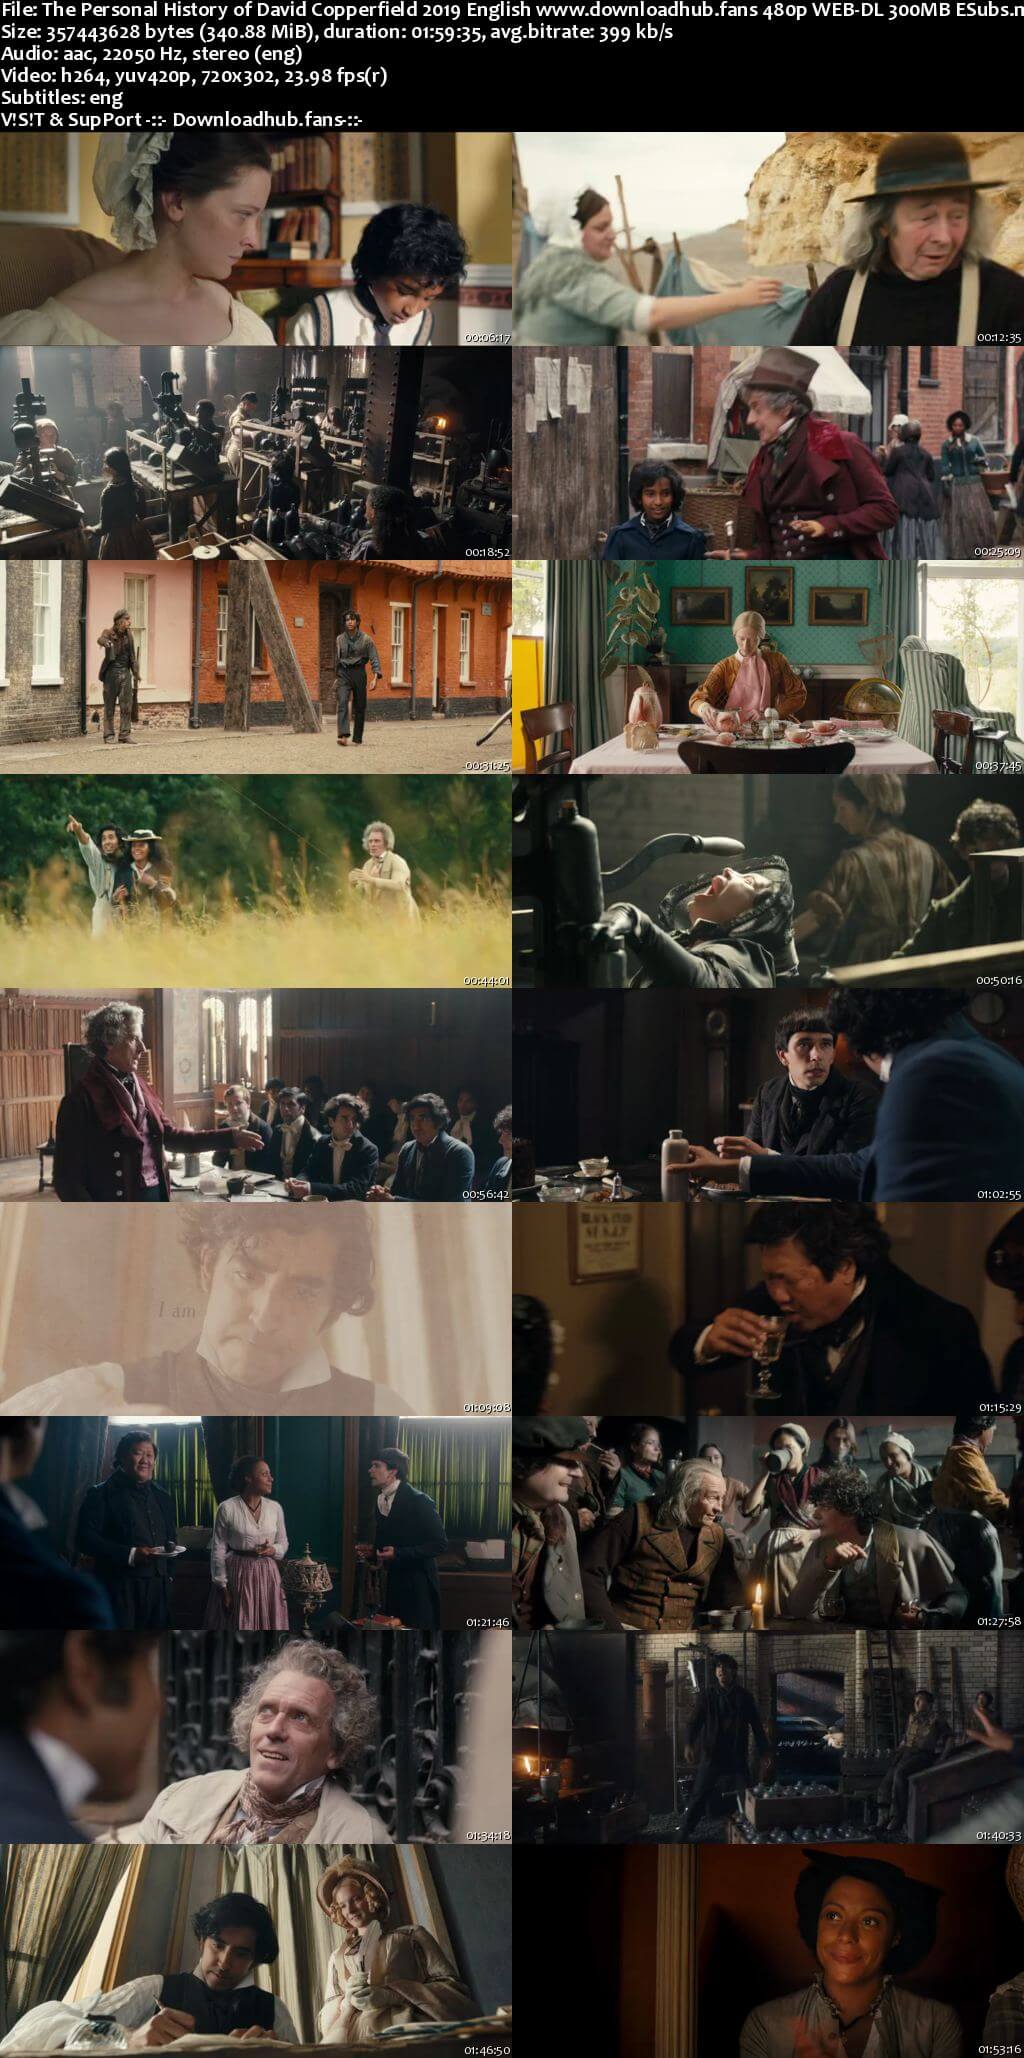 The Personal History of David Copperfield 2019 English 300MB Web-DL 480p ESubs